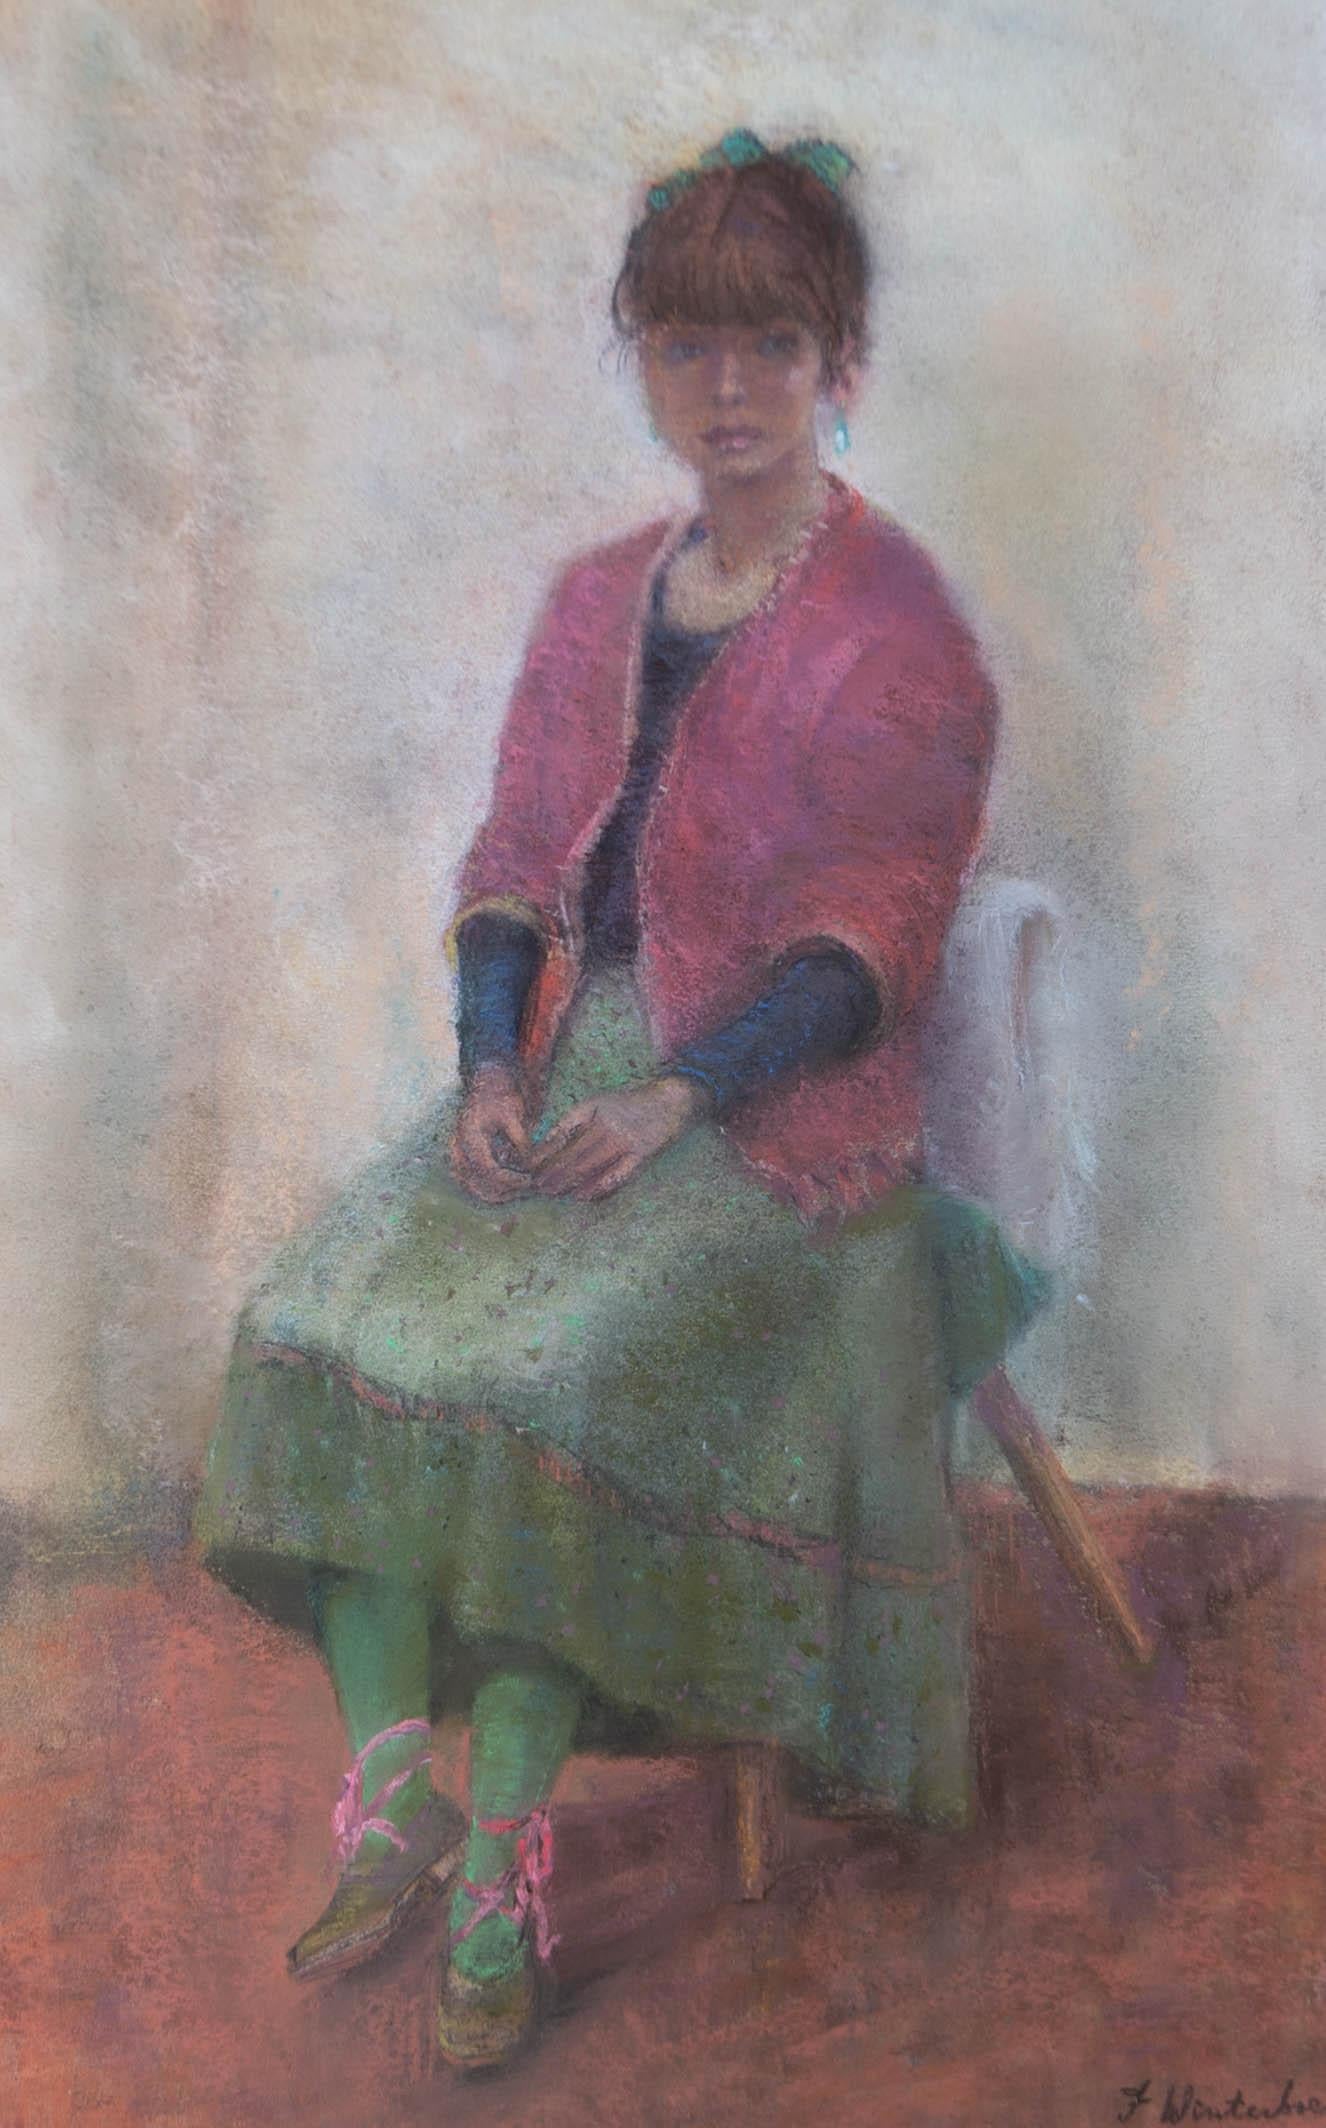 A very pretty portrait in a wonderful palette showing a young girl sitting elegantly poised, with her hands in her lamp, on a wooden chair. She is wearing a pink cardigan with green skirt and green tights and pink ribbons on her shoes. This